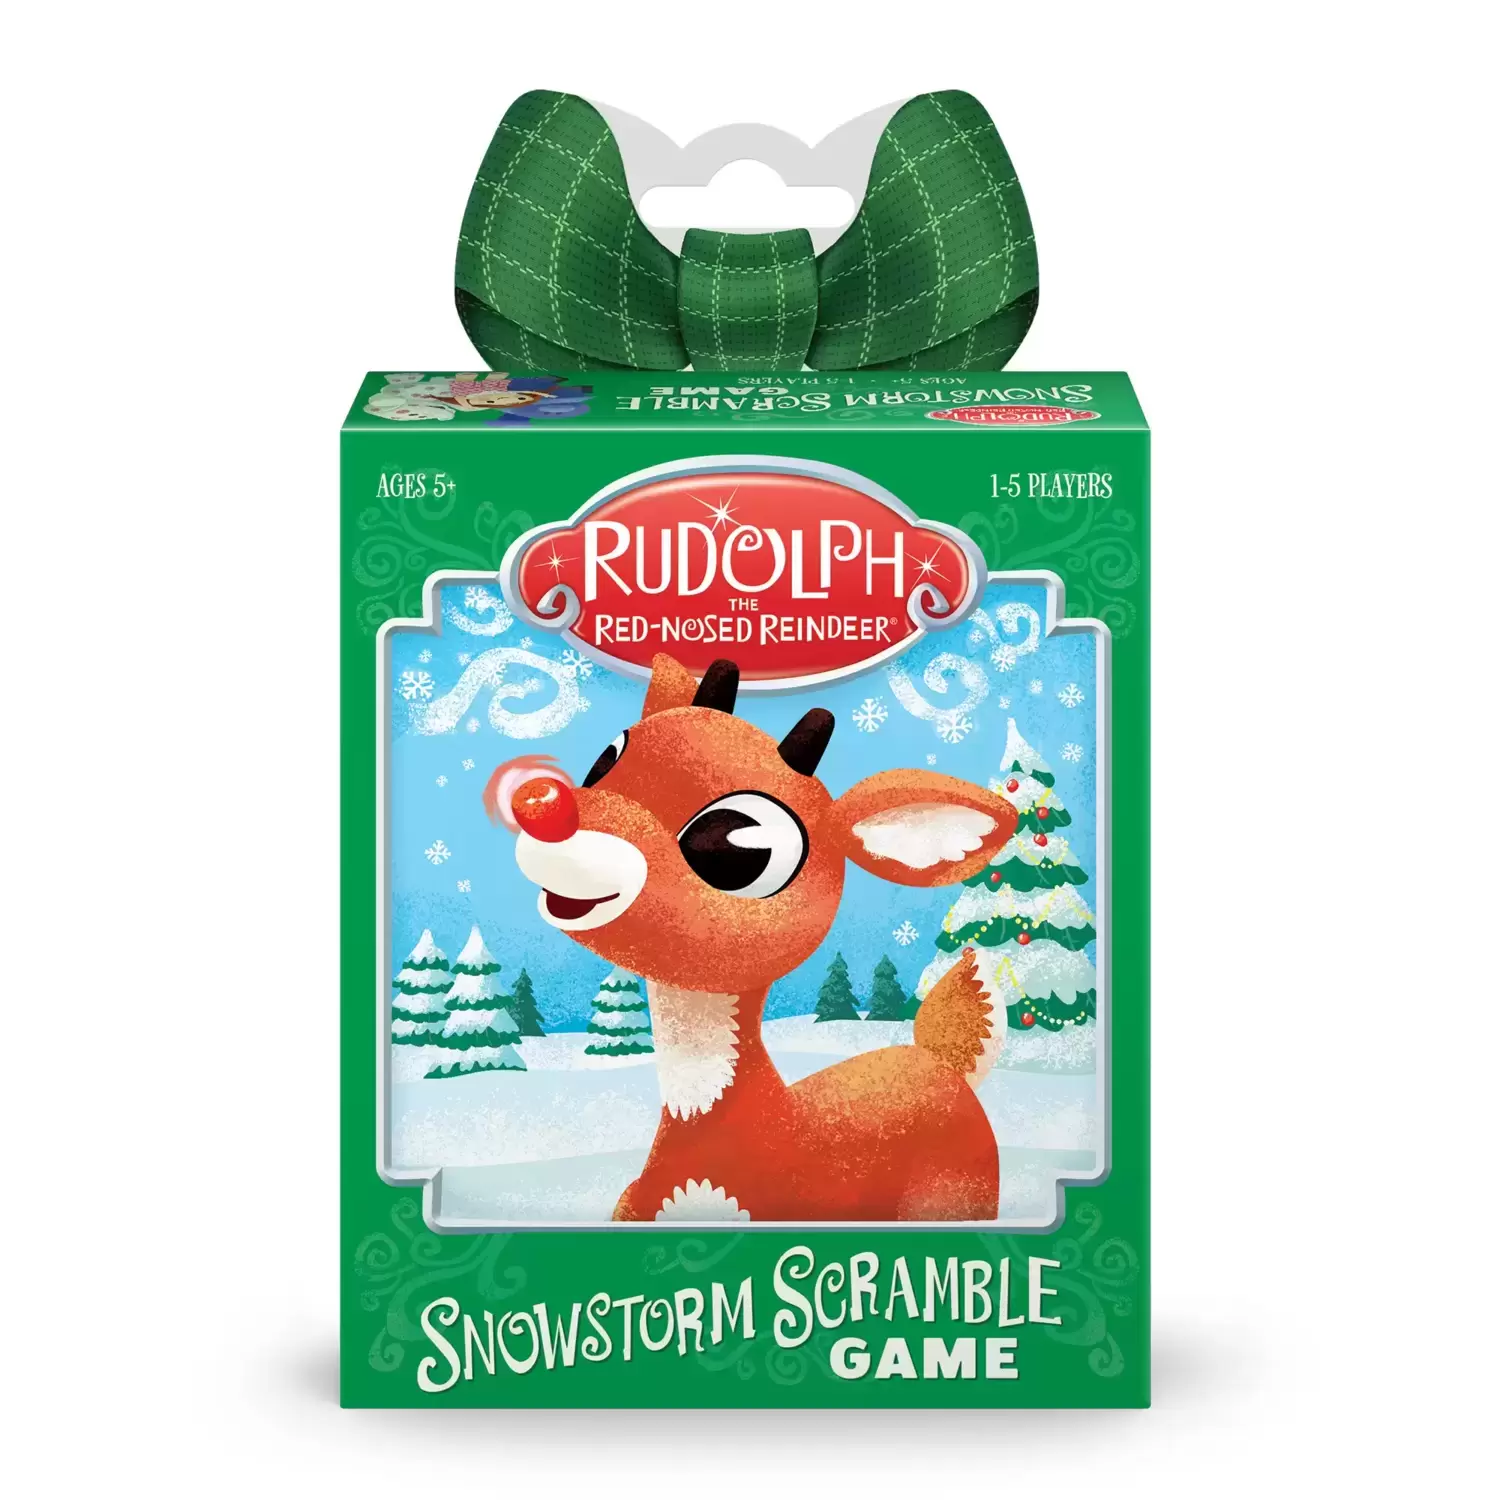 Funko Game - Rudolph The Red-nosed Reindeer - Snowstorm Scramble Game